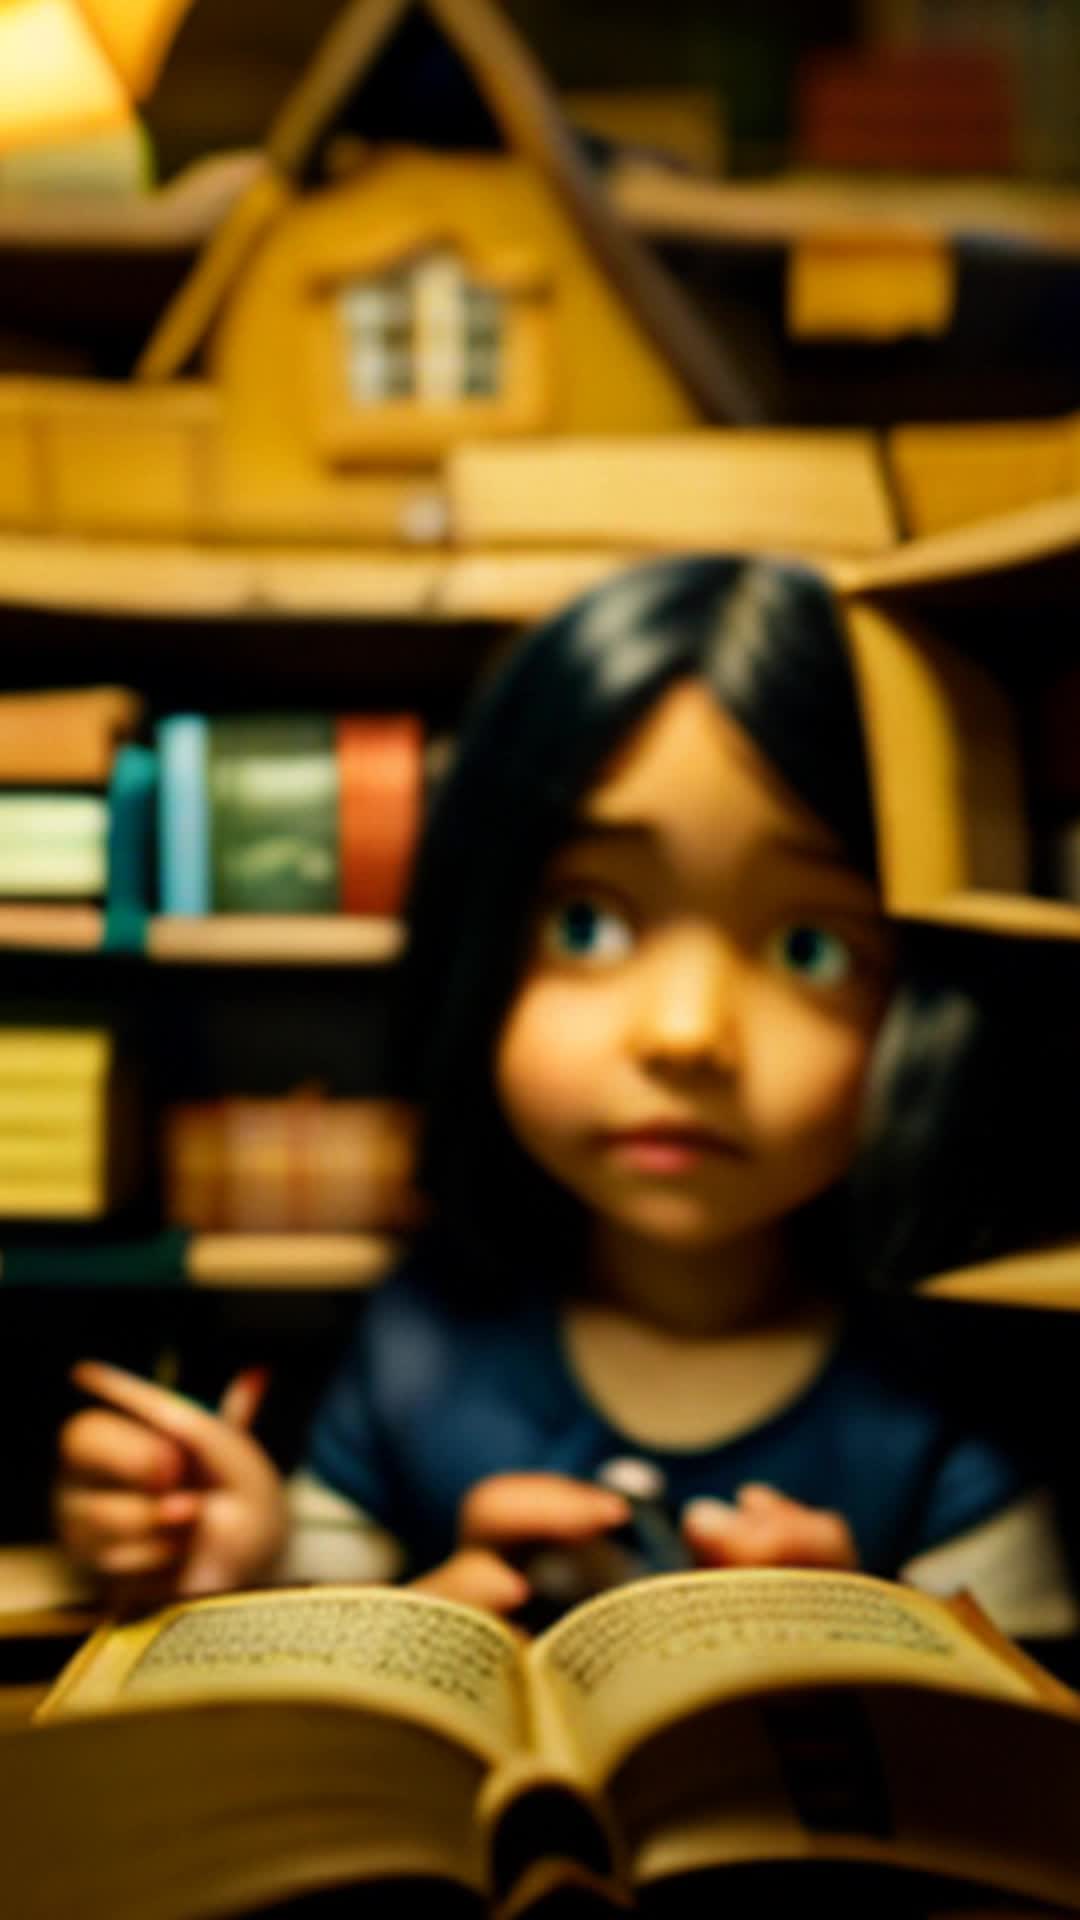 Little Nia, eight-year-old, local library, cardboard cutout house, tiny villager secret spy, animating storytelling, friend audience, detailed cardboard texture, imaginative play theme, soft ambient library lighting